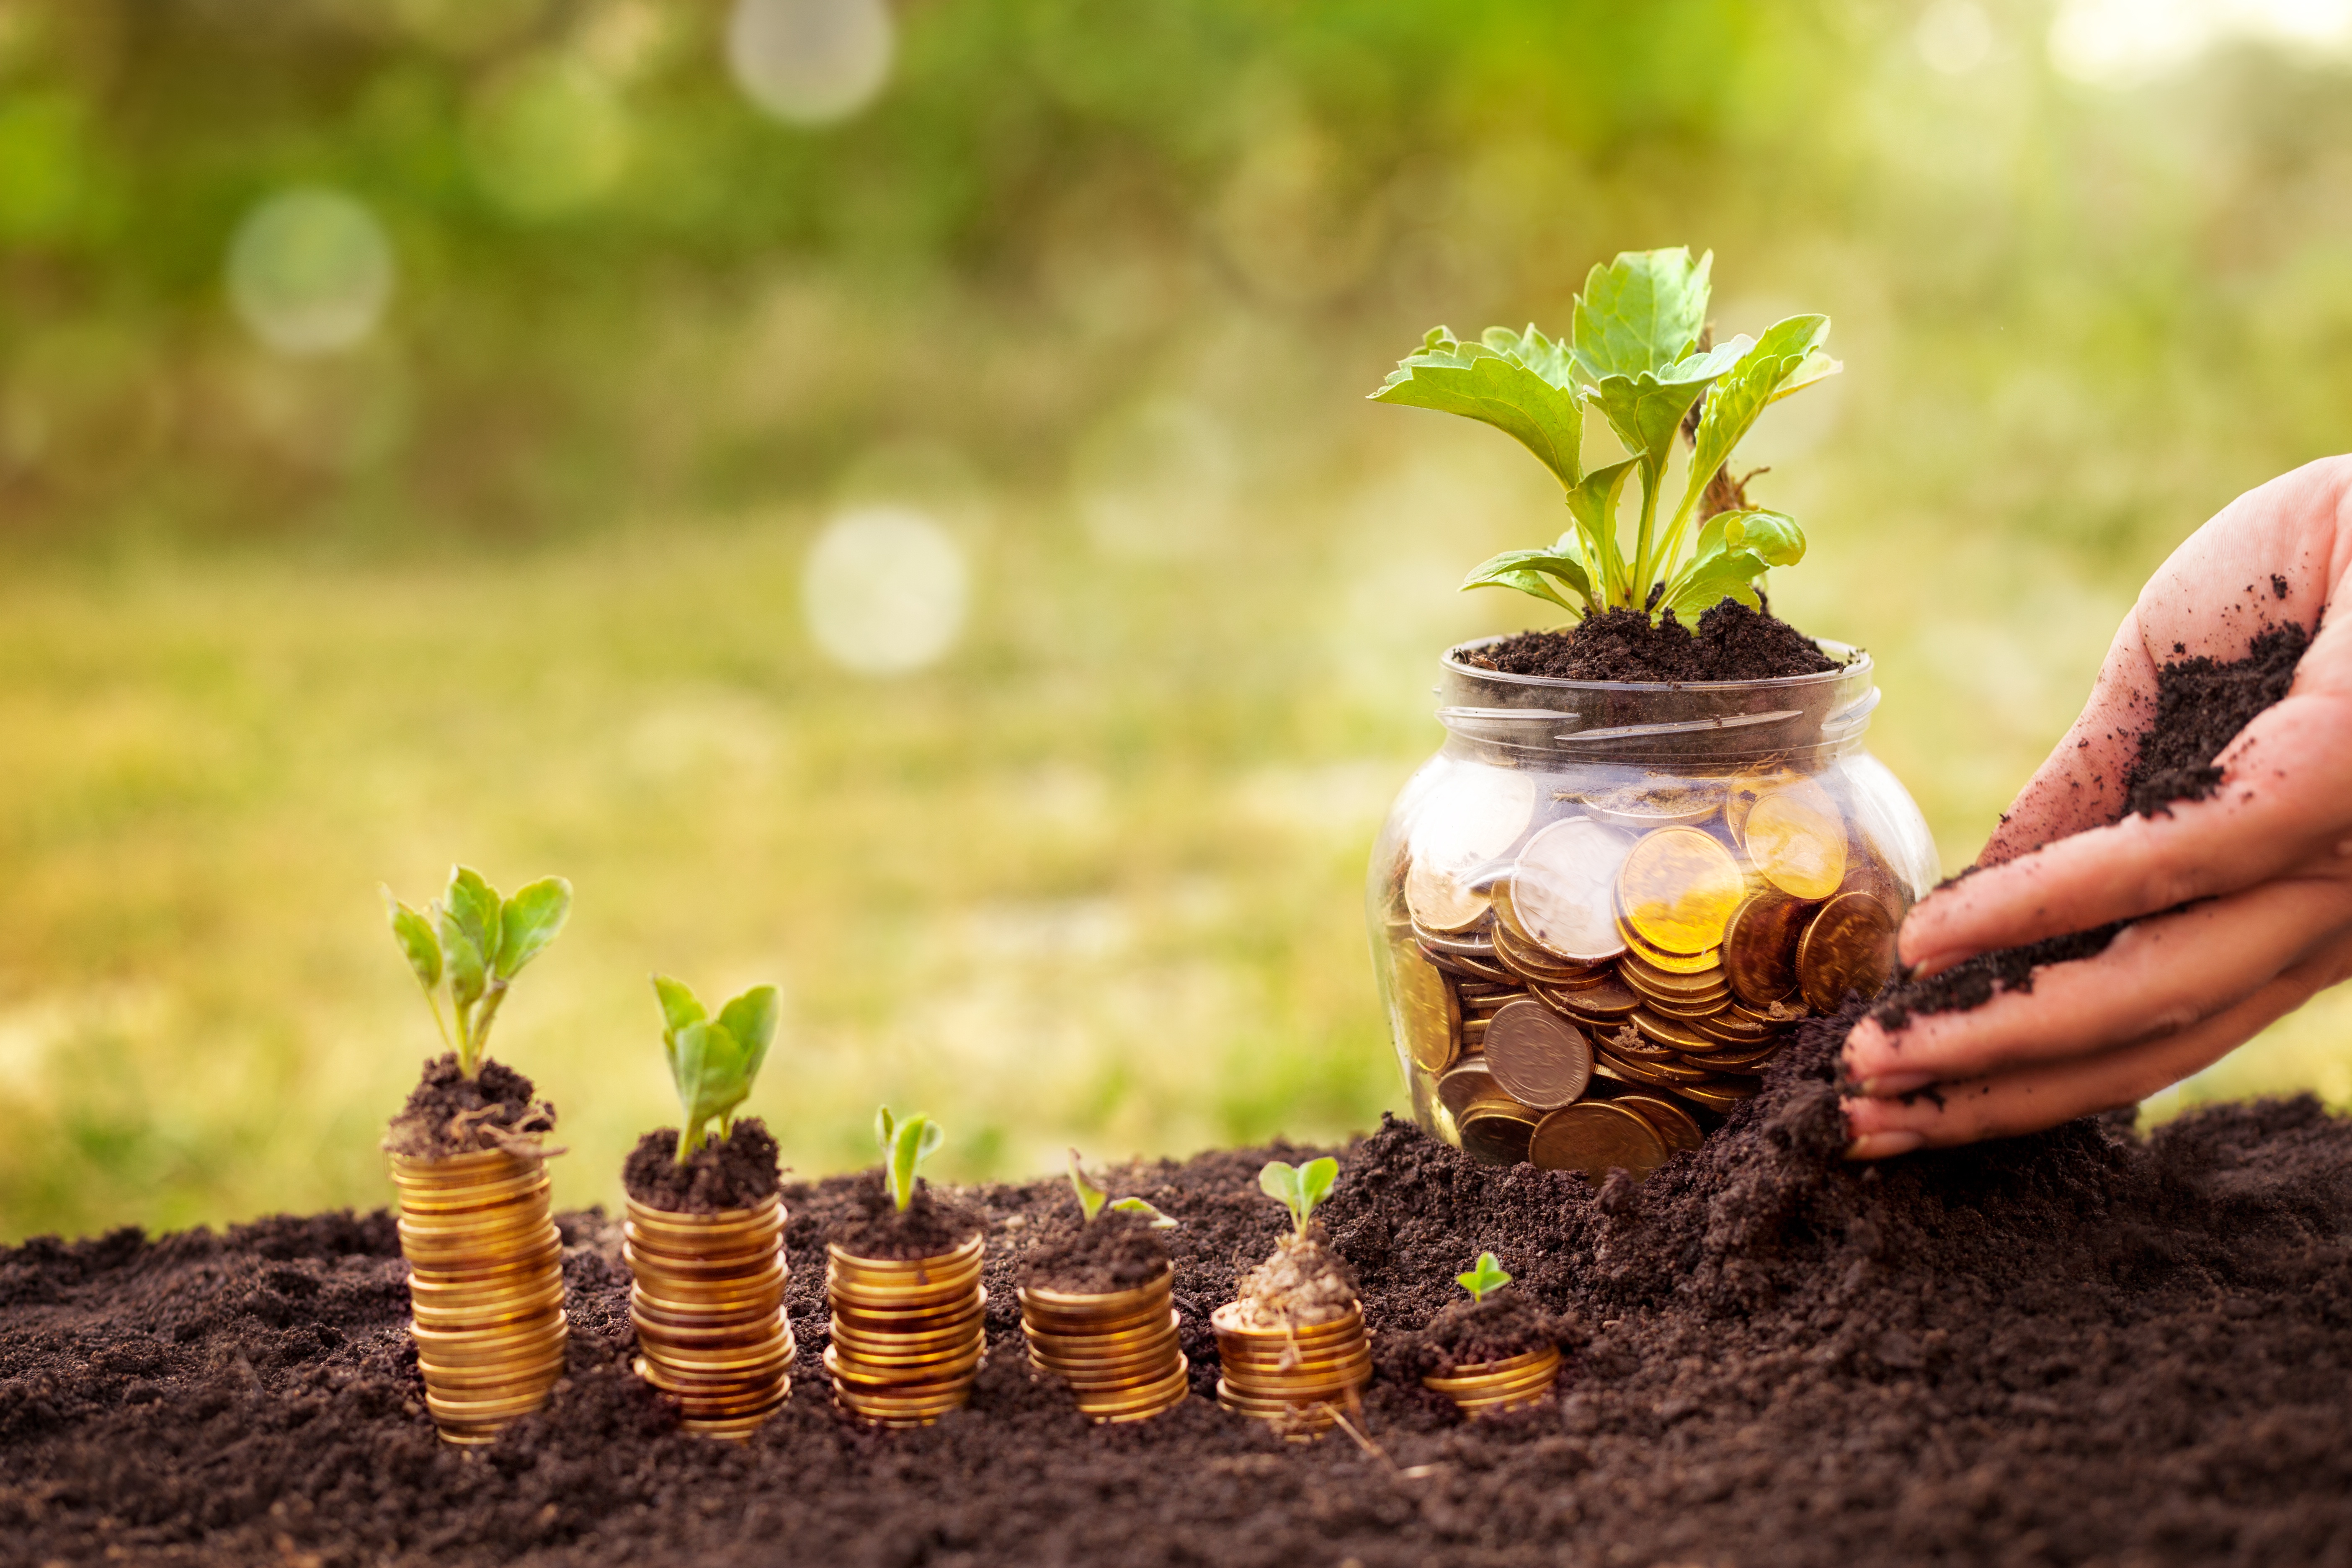 Not Your Average Gardening Blog: Easy Ways to Start a Garden and Save Some Cash